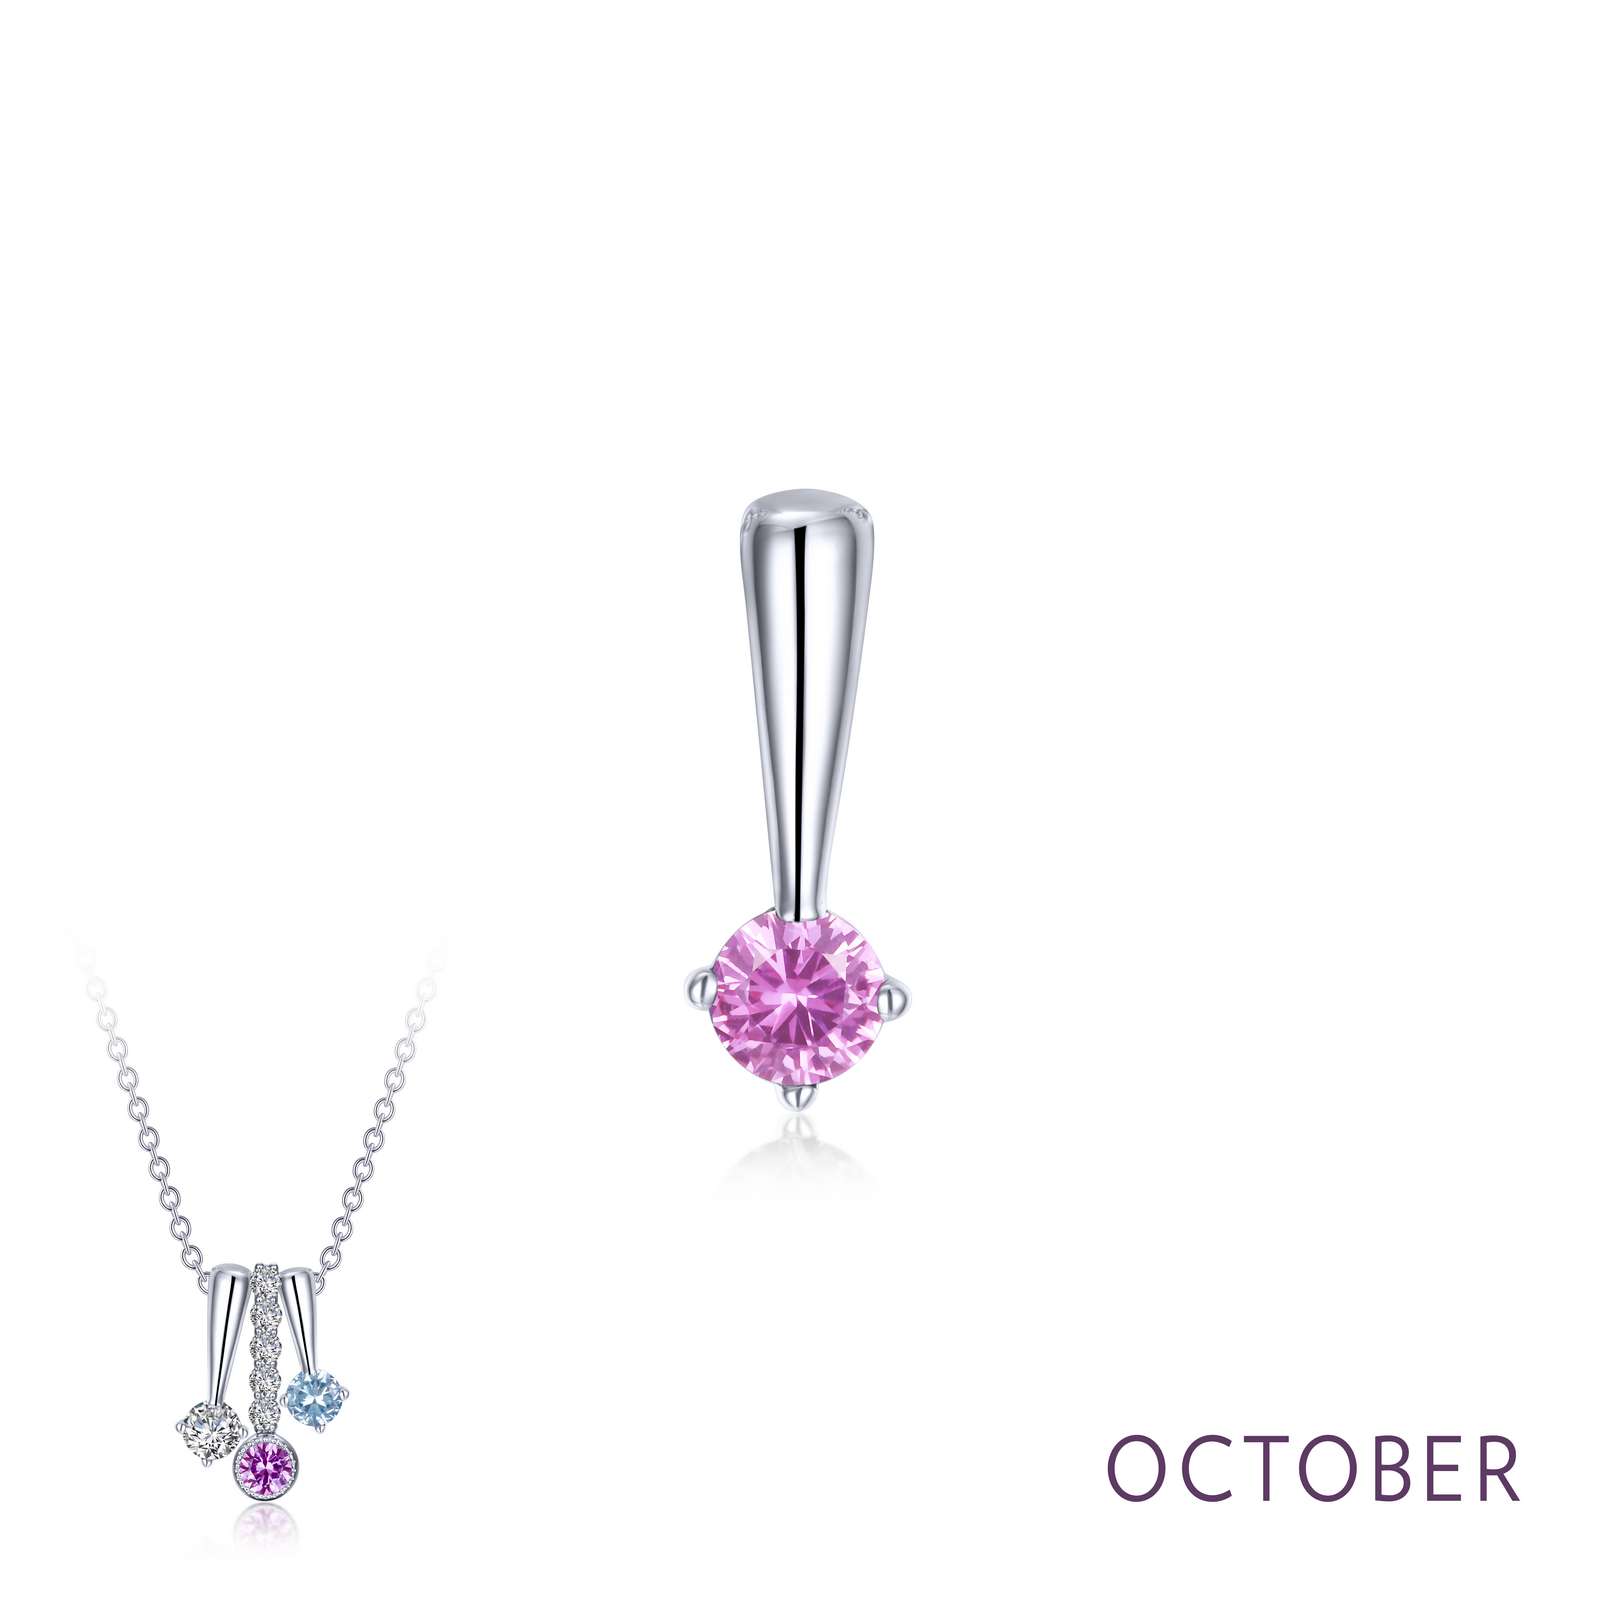 October Birthstone Love Pendant Griner Jewelry Co. Moultrie, GA